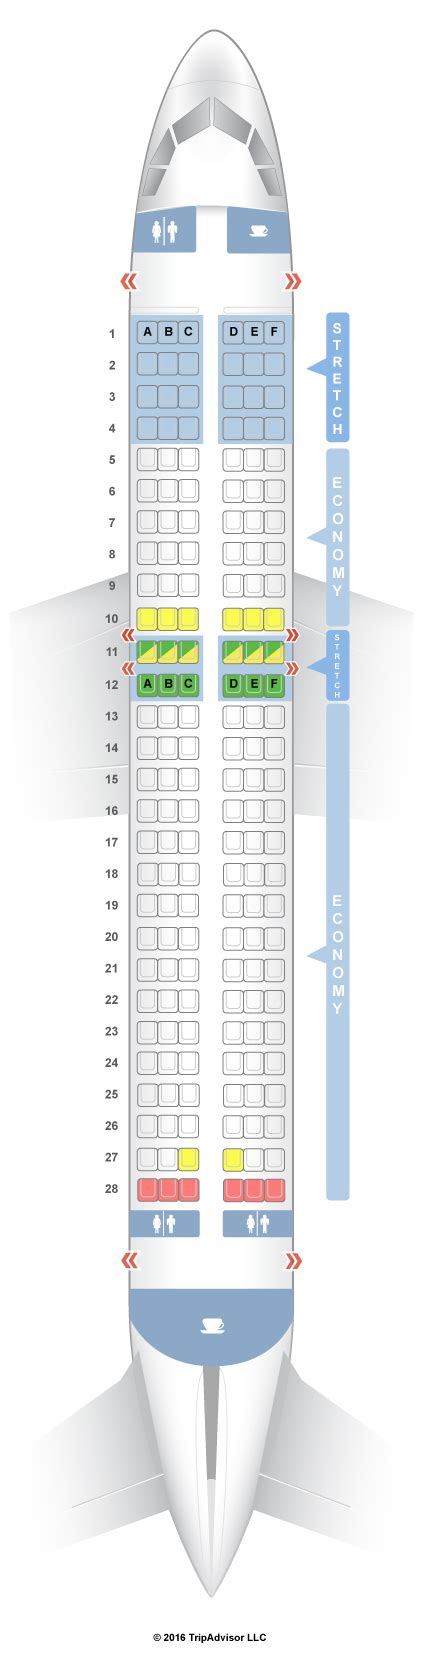 Seat. On the A320, the first three rows offer “stretch” seating with 32-33 inches of legroom (exit row 13 also offers a lot of extra space). The rest of the aircraft has seat pitch between 28 and 30 inches. I’ll be honest, though. With the super slimline seats that are installed the legroom felt more like 31 or 32 inches. Seats do not ....